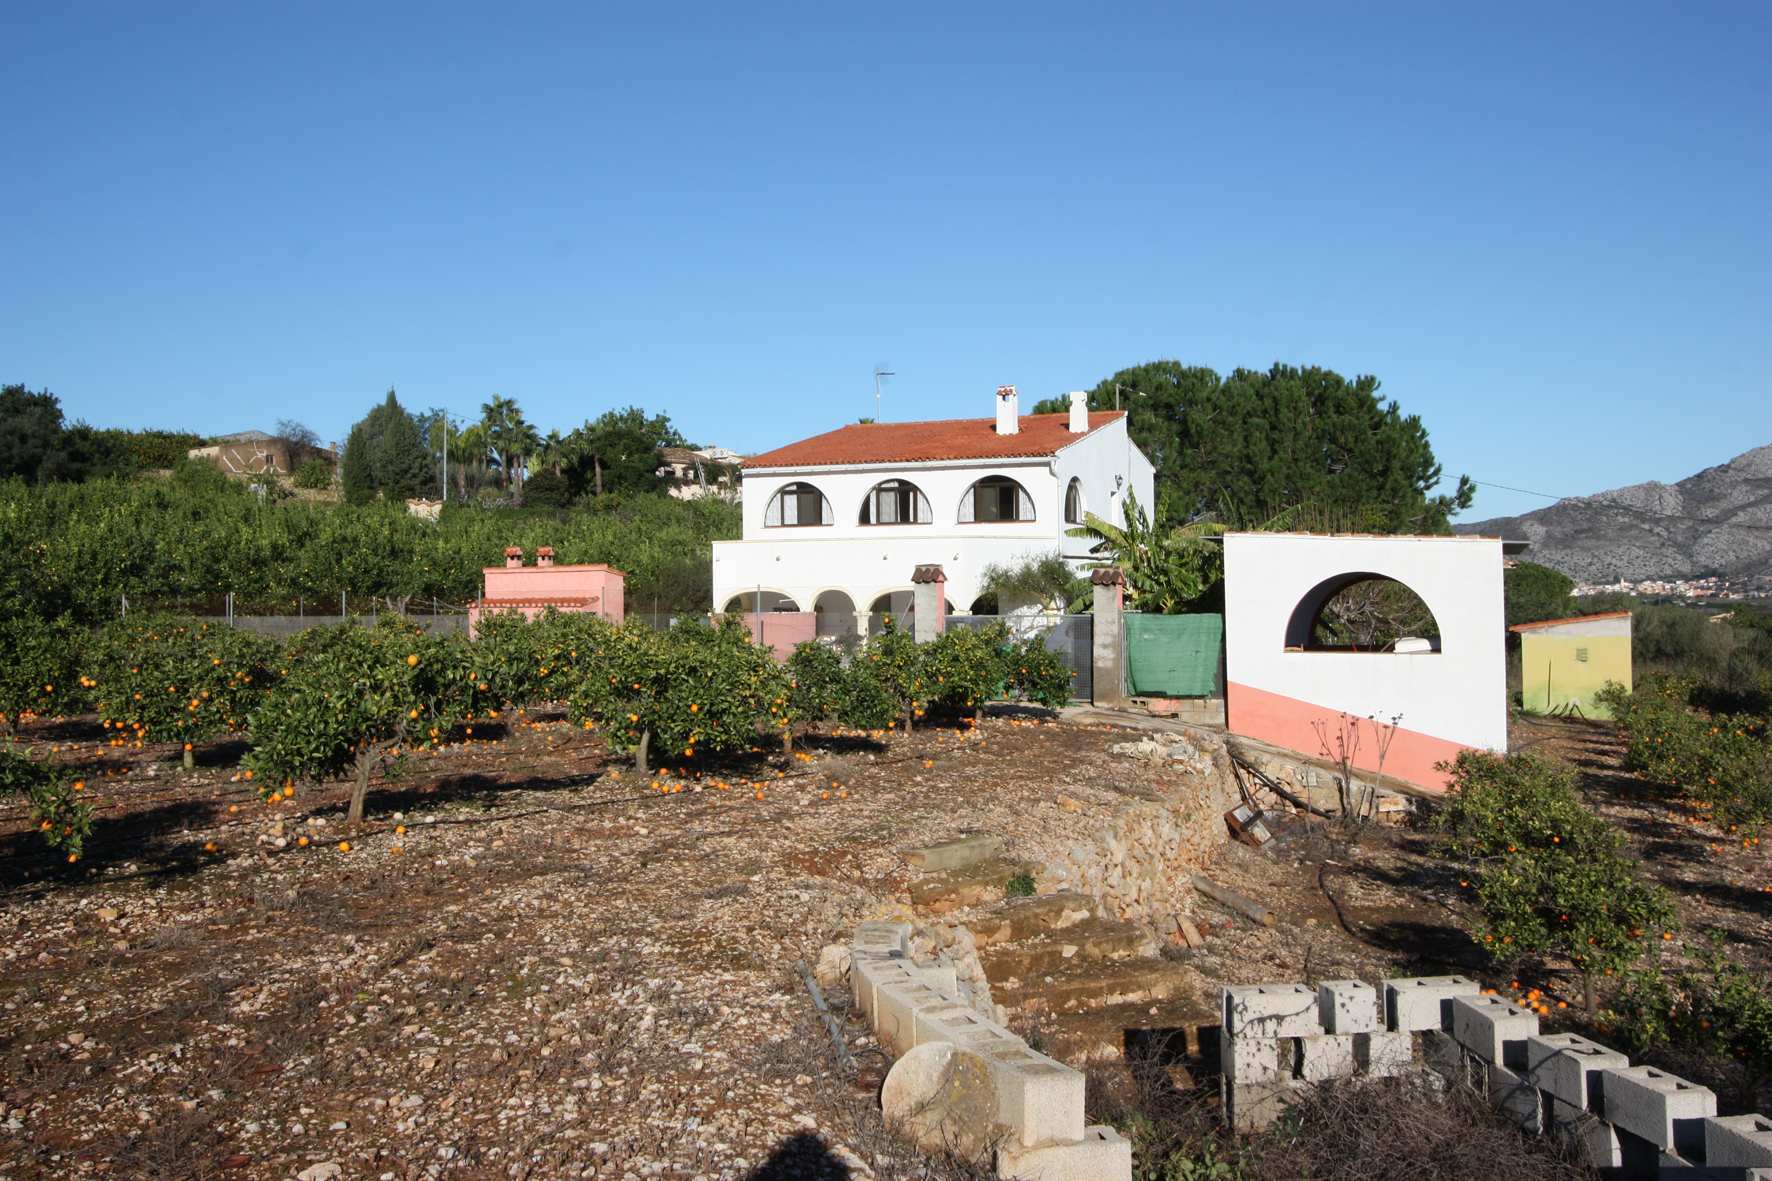 Villa / Finca with a plot of 7012m2 for sale in Benidoleig